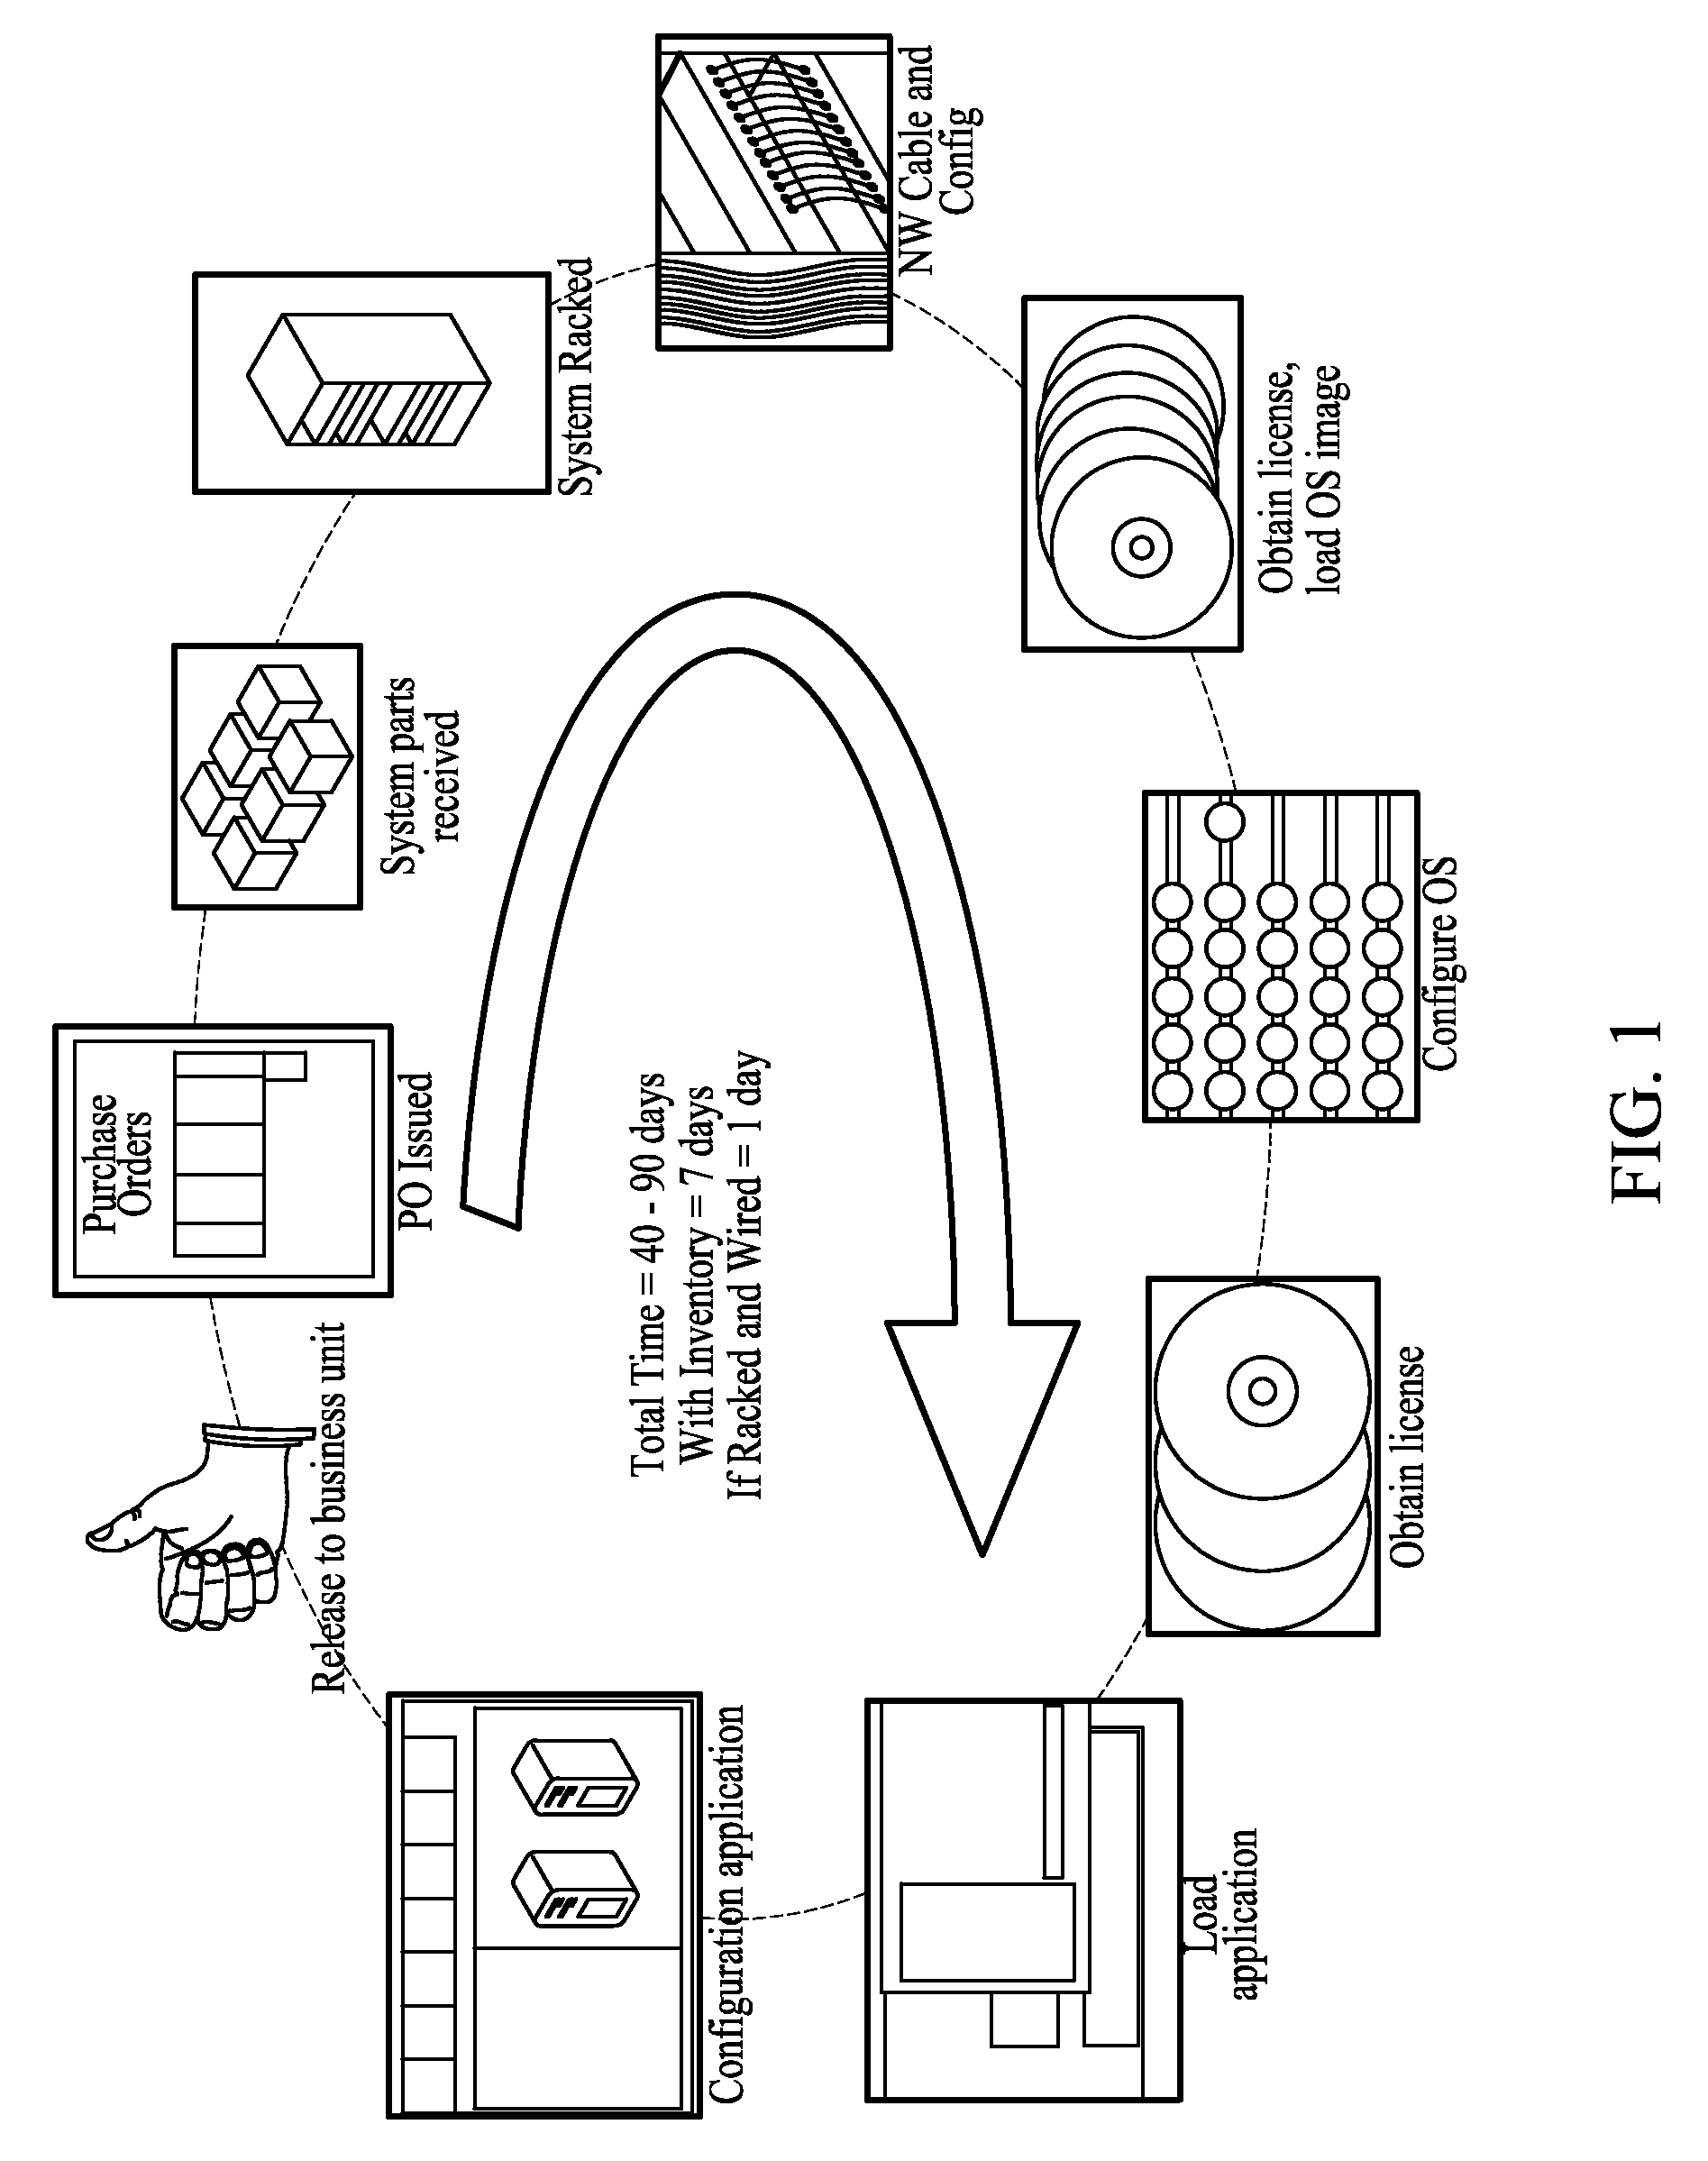 Method and remote system for creating a customized server infrastructure in real time